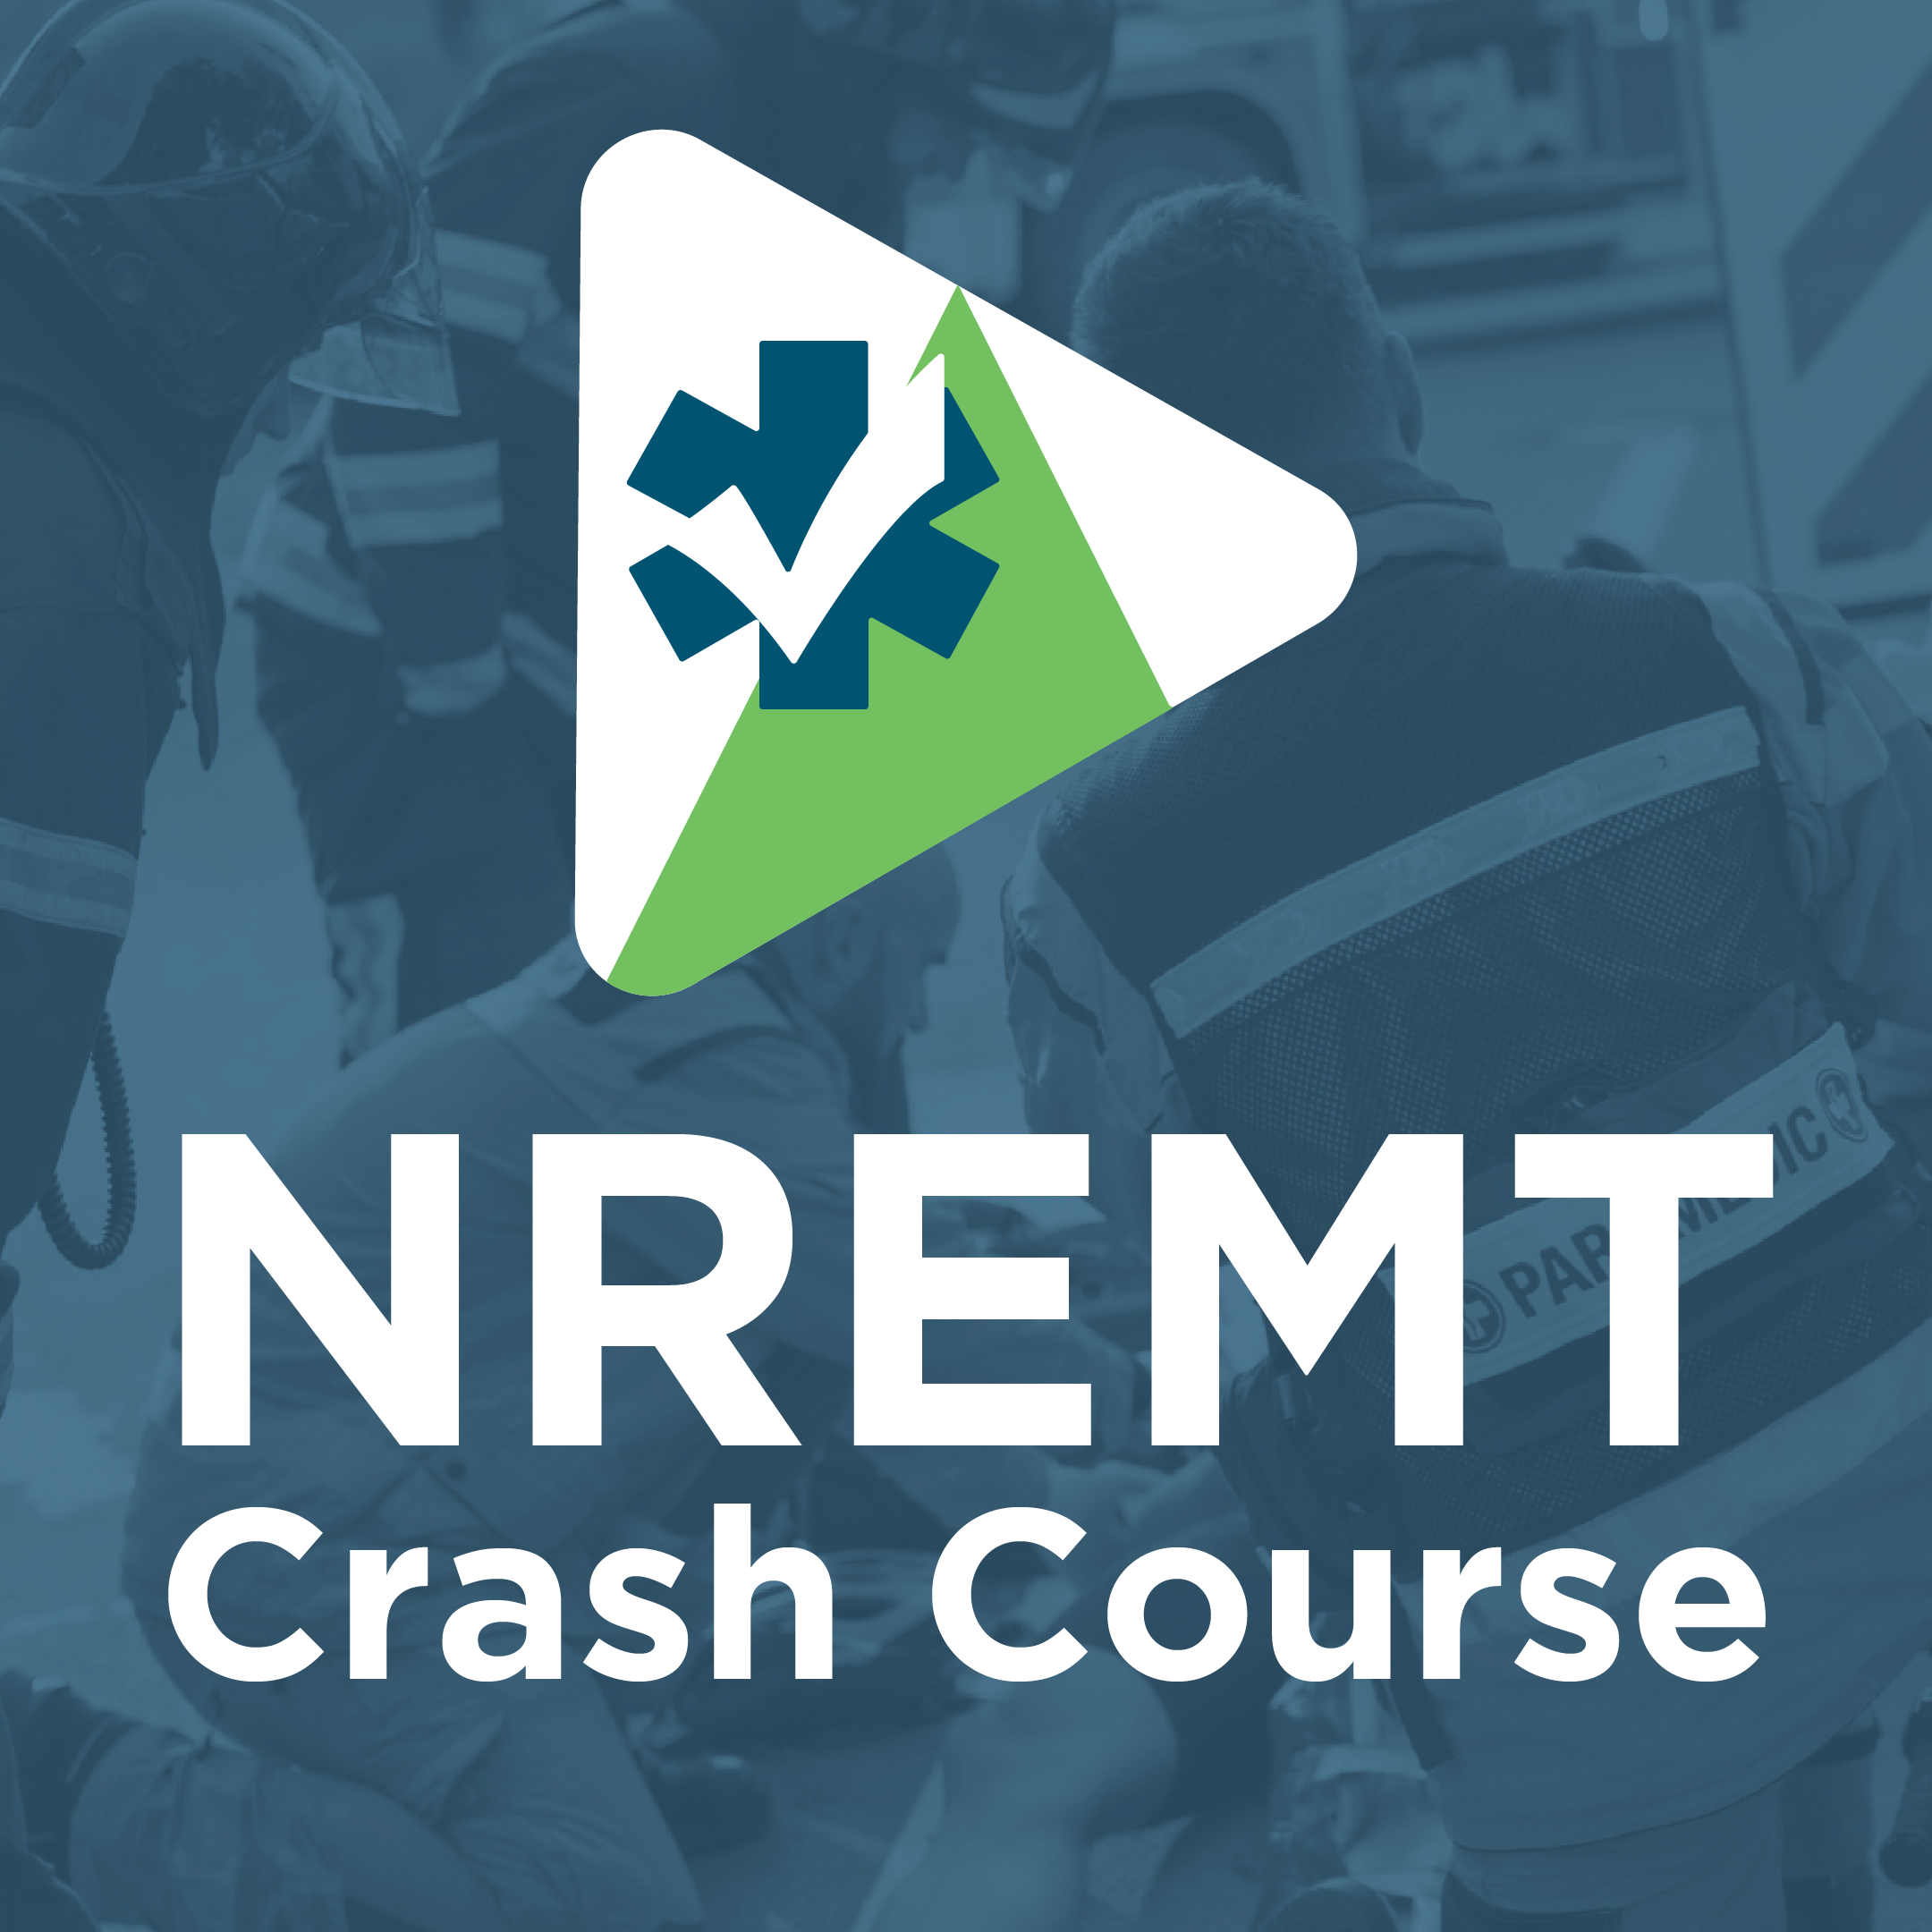 NREMT Crash Course product logo showing video play button with star of life and checkmark inside it. Words 